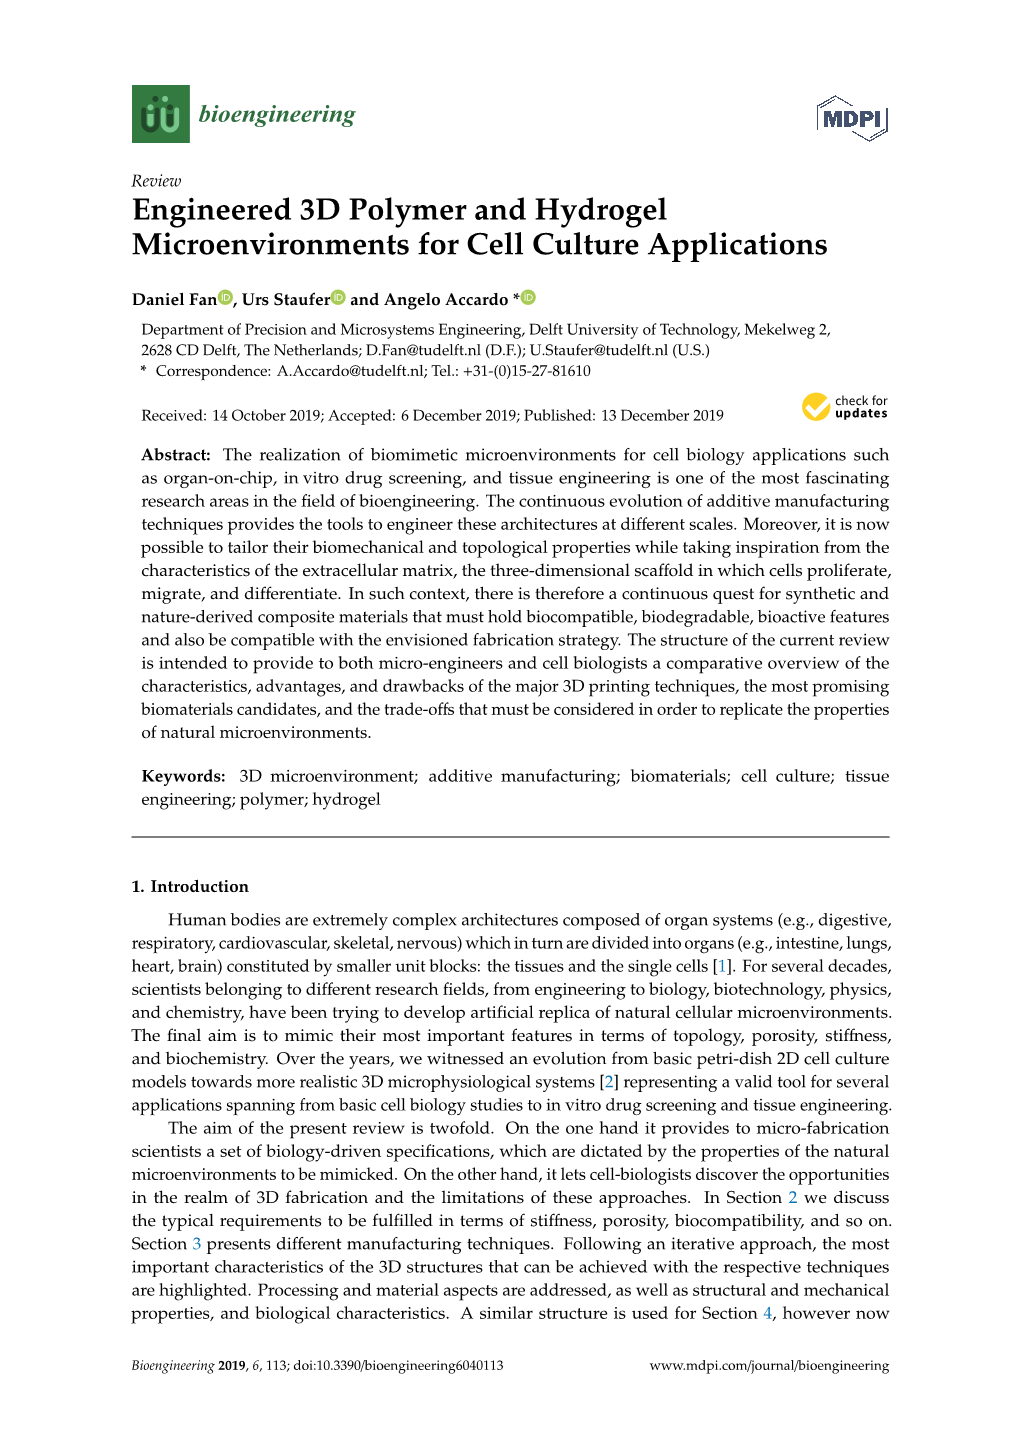 Engineered 3D Polymer and Hydrogel Microenvironments for Cell Culture Applications